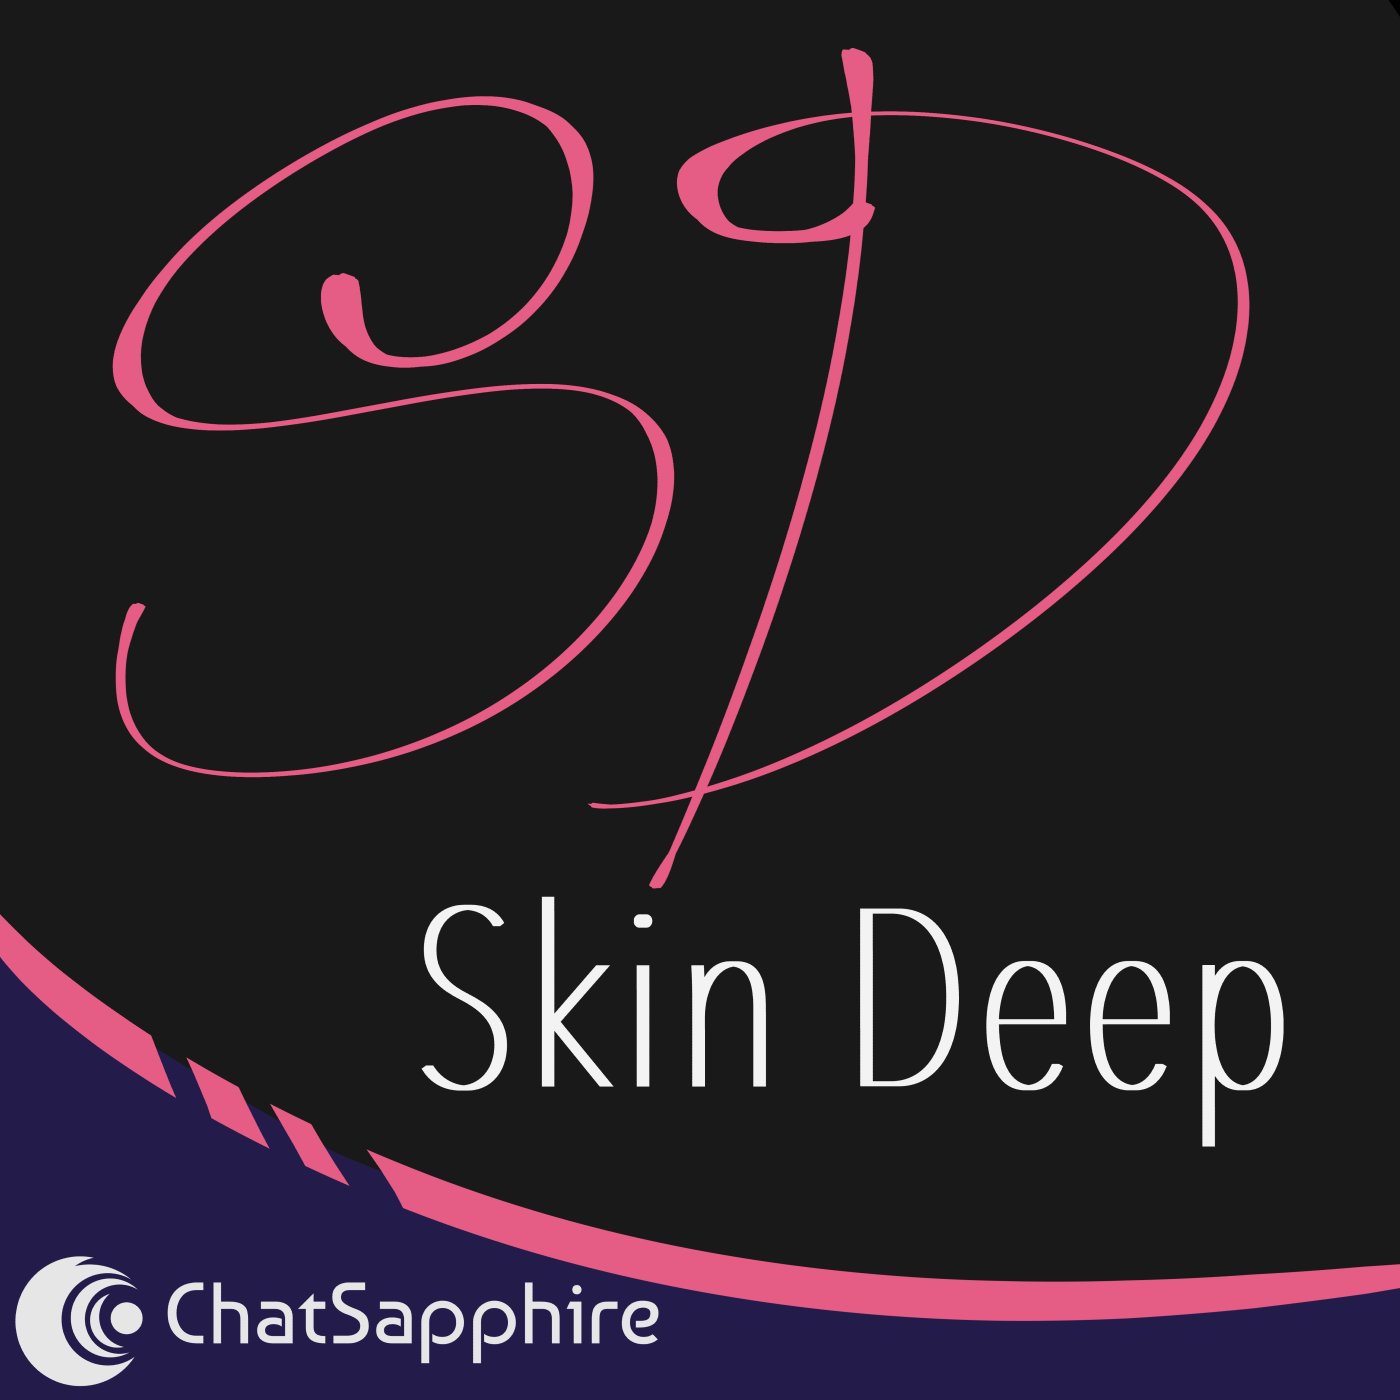 Show artwork for Skin Deep by ChatSapphire